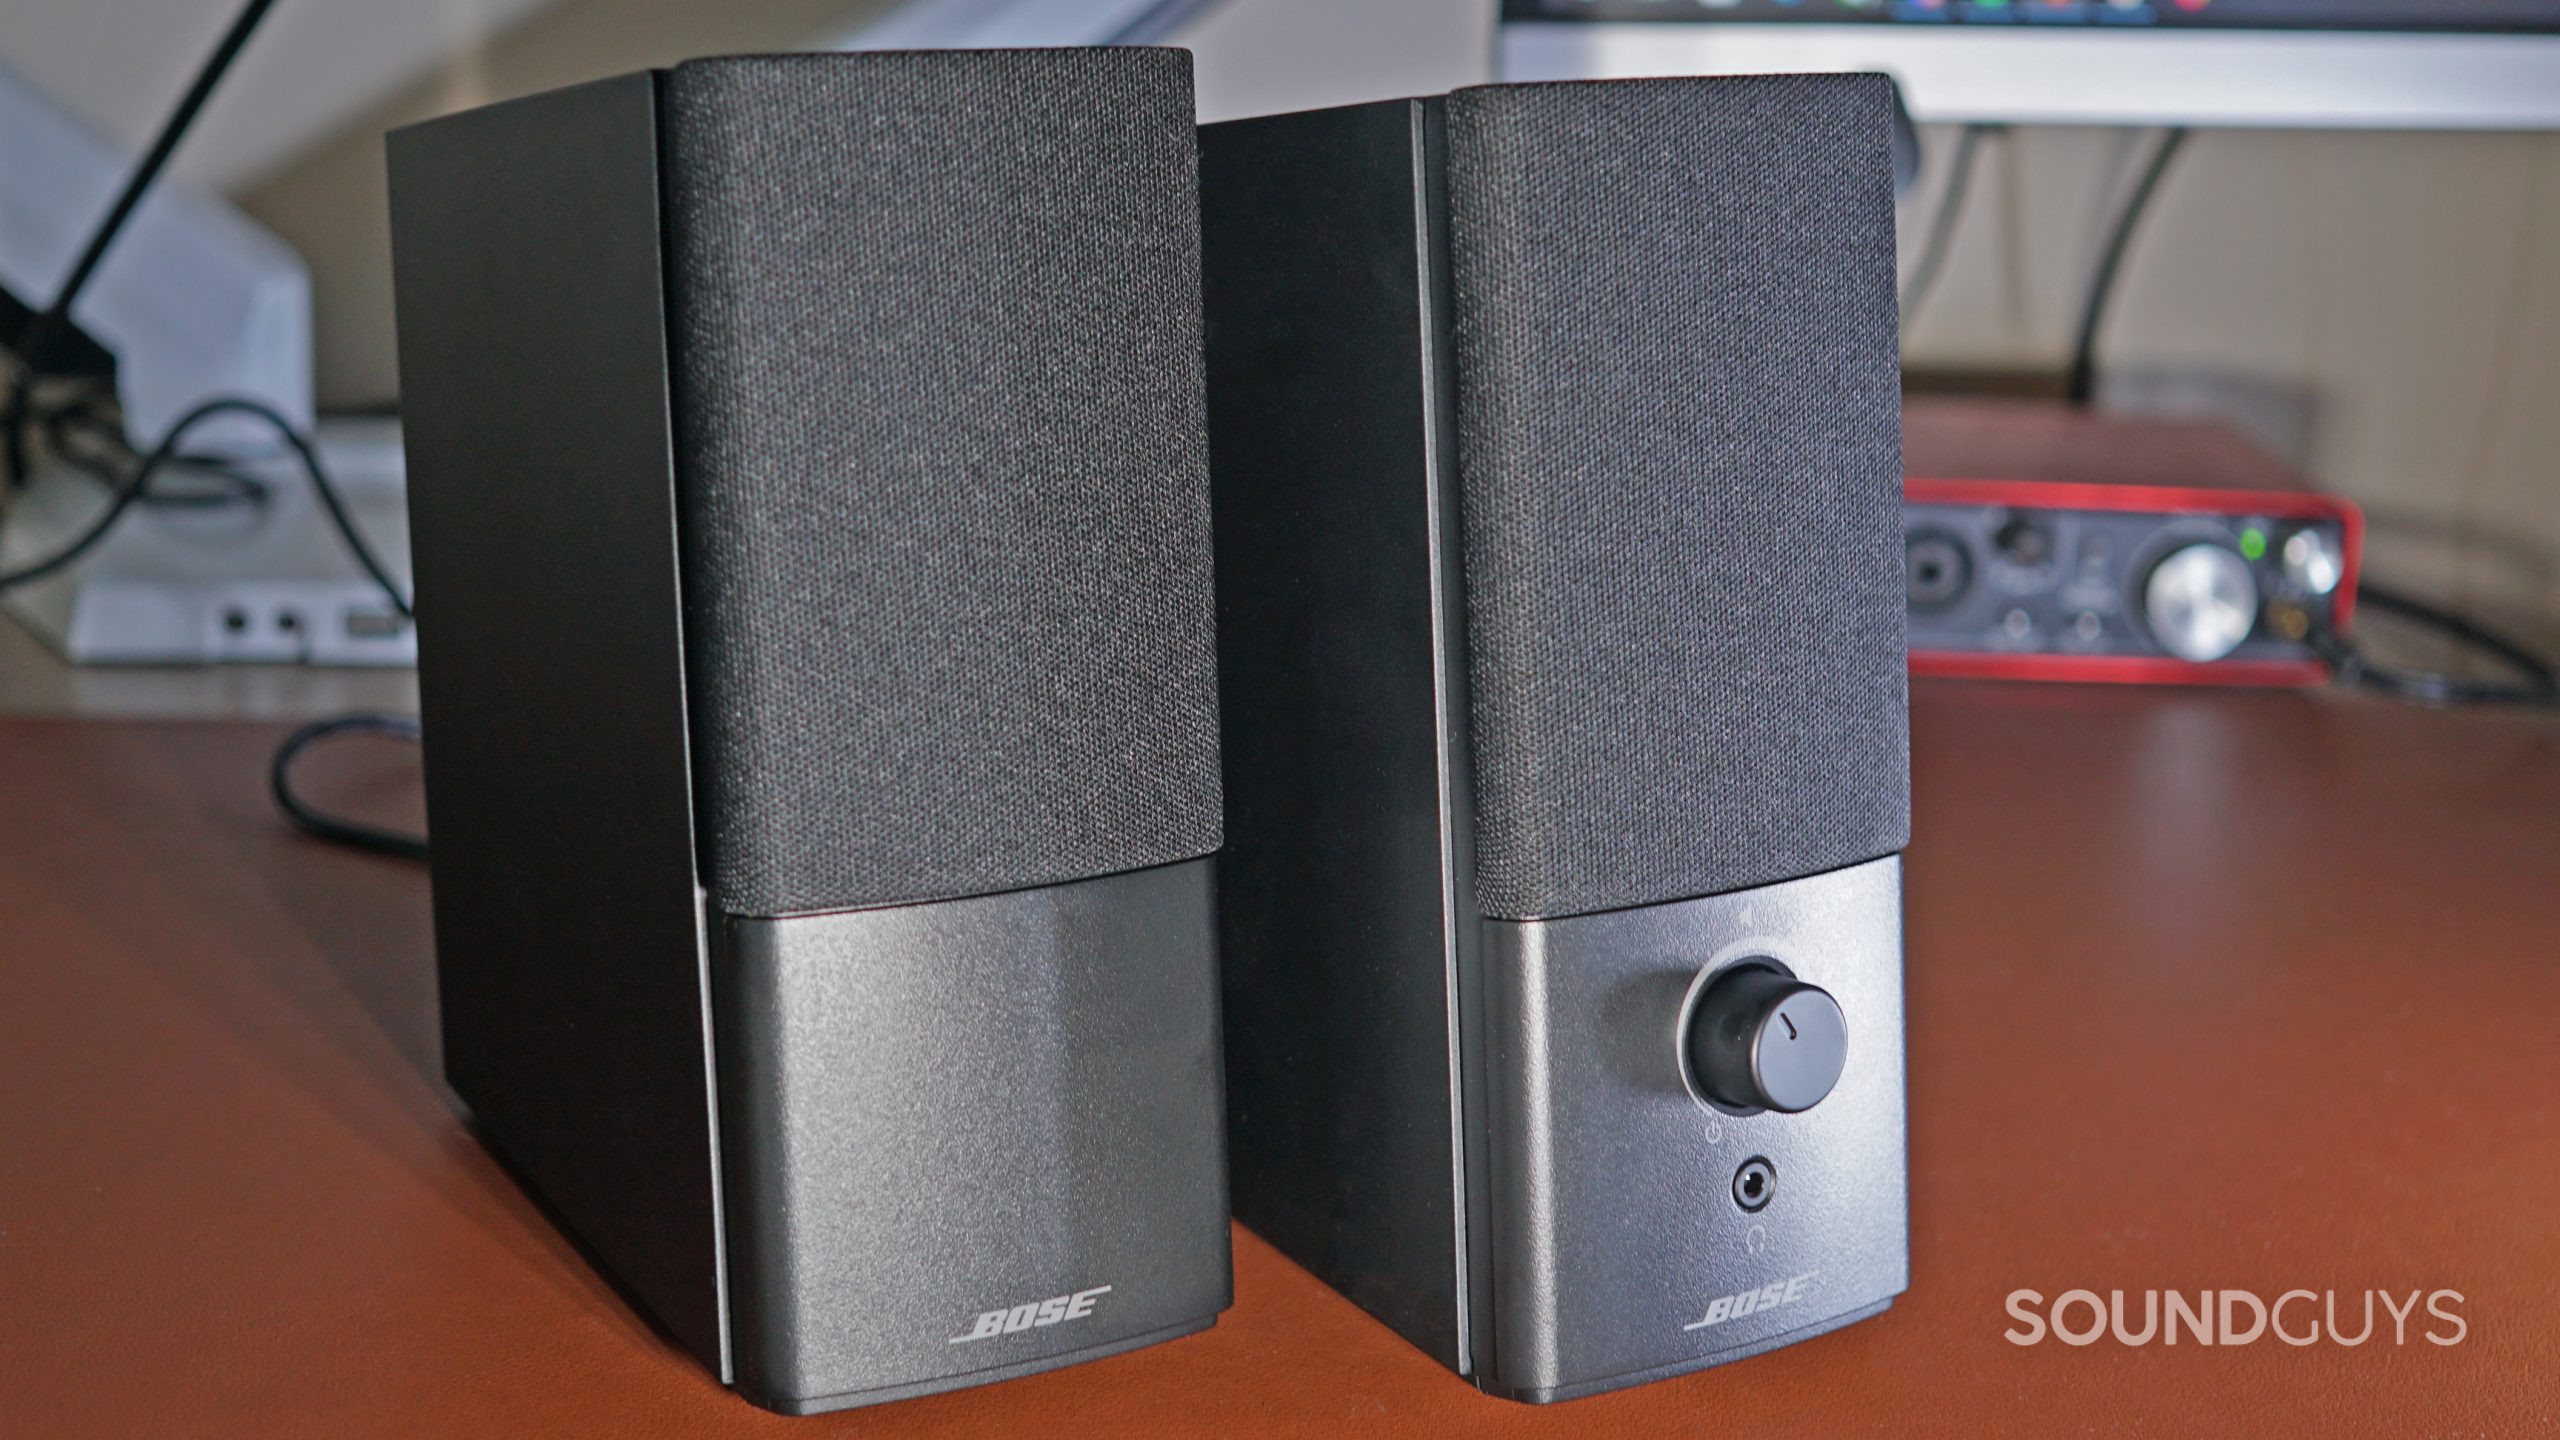 The Bose Companion 2 Series III speakers stand on a leather surface in front of ViewSonic monitors and a Focusrite Scarlett 2i2 audio interface.